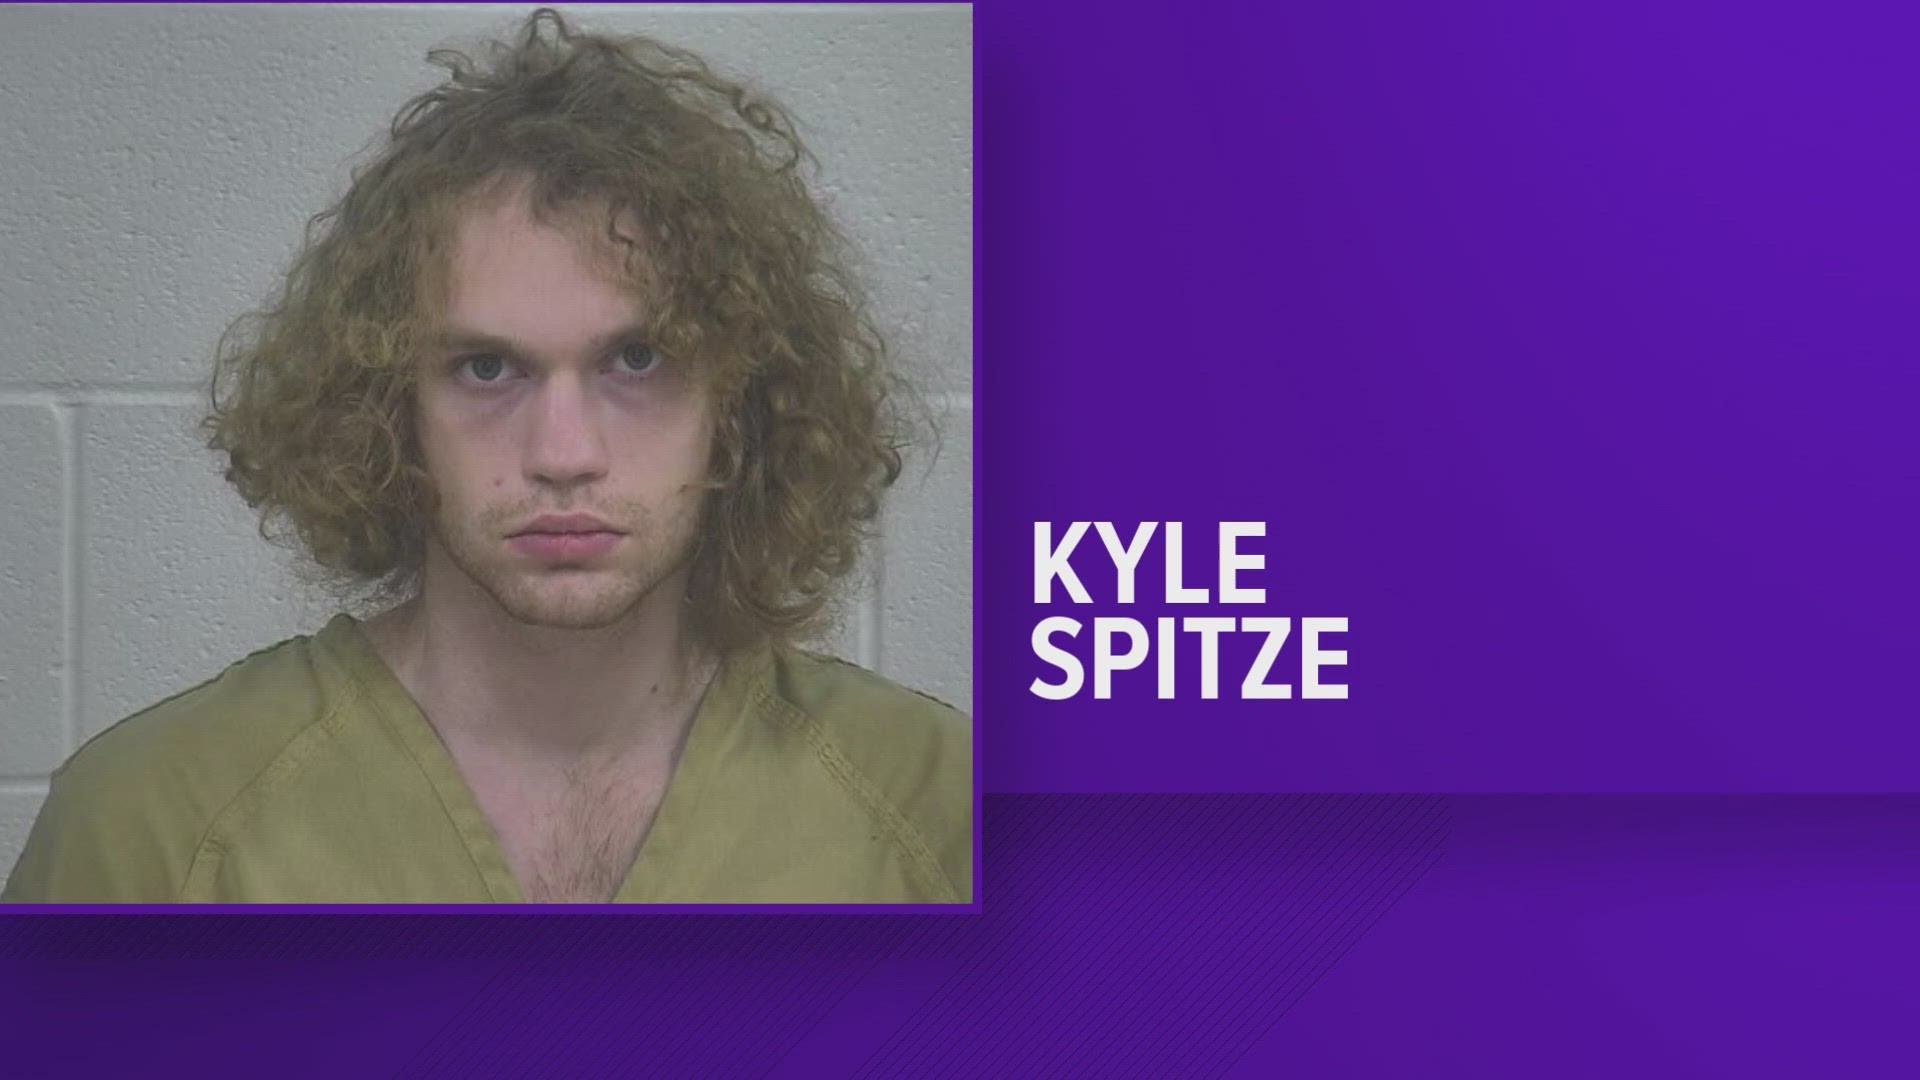 A newly filed indictment shows Kyle Spitze is facing child sex crime and animal abuse charges.